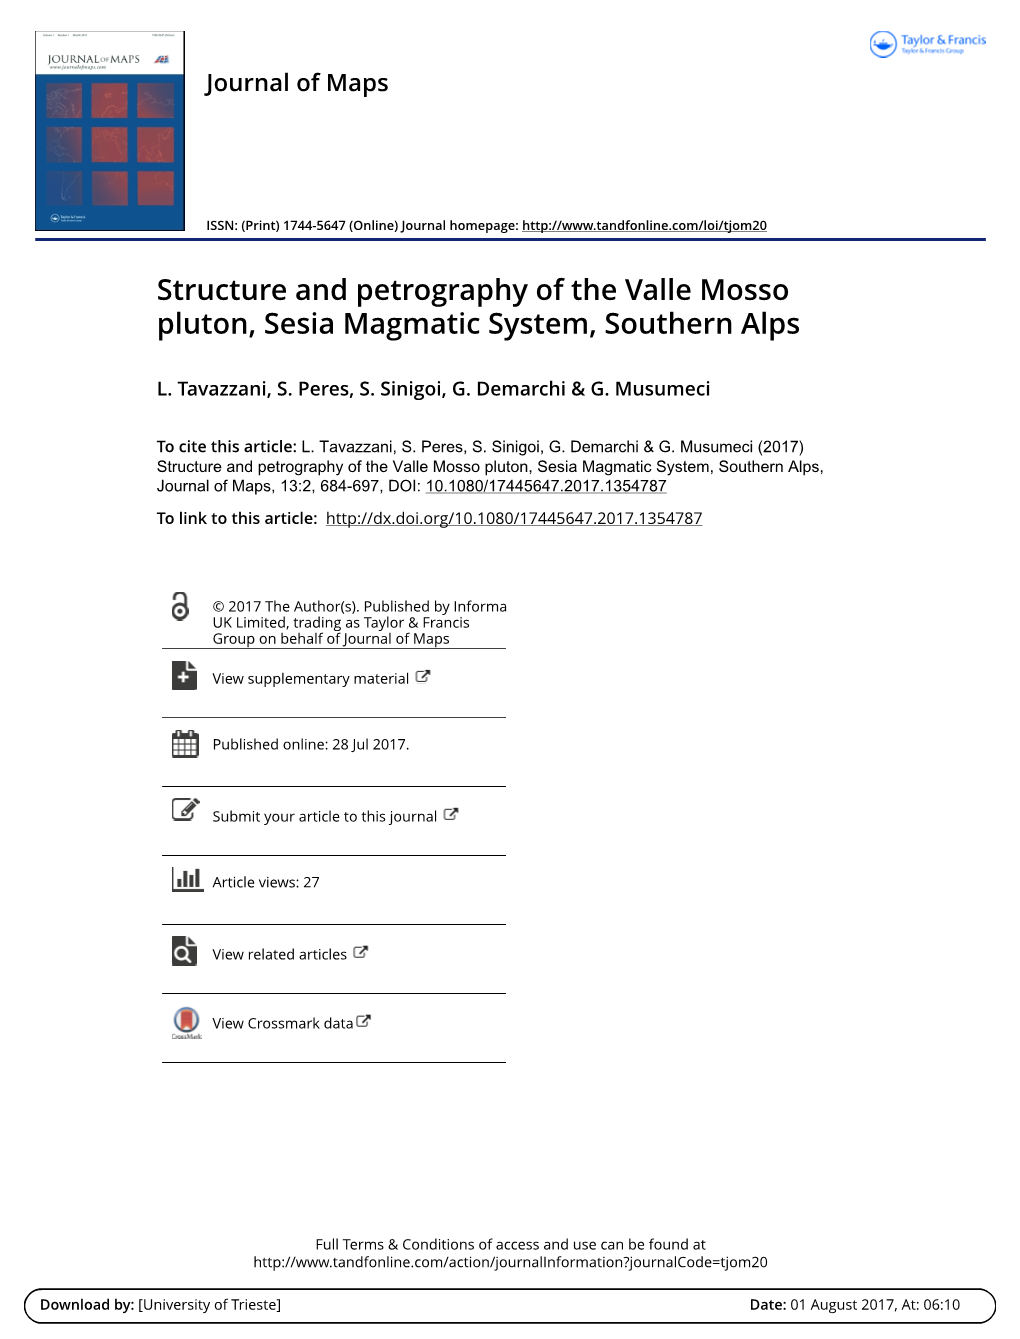 Structure and Petrography of the Valle Mosso Pluton, Sesia Magmatic System, Southern Alps